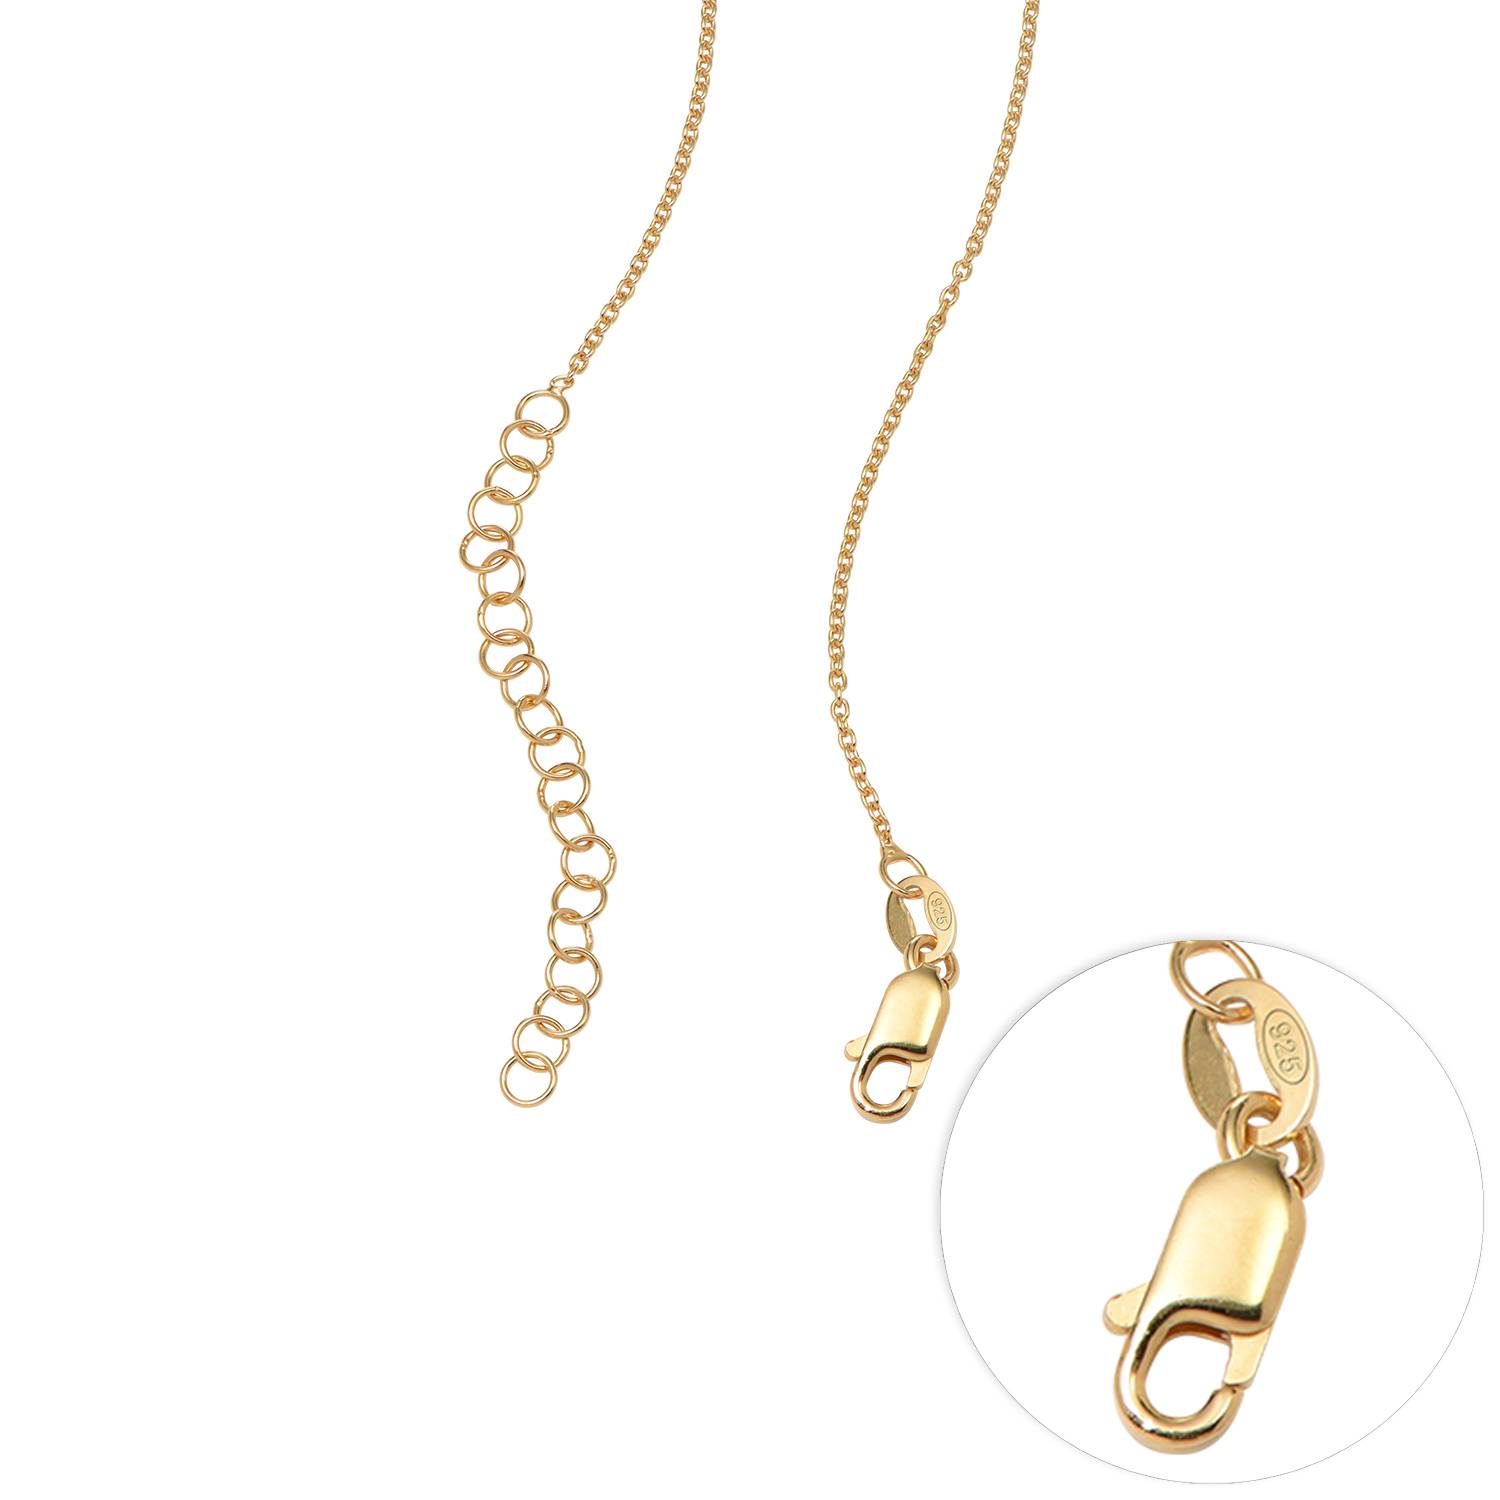 New Mum Jewellery – Baby Feet Charm Necklace with in 18ct Gold Plating-1 product photo